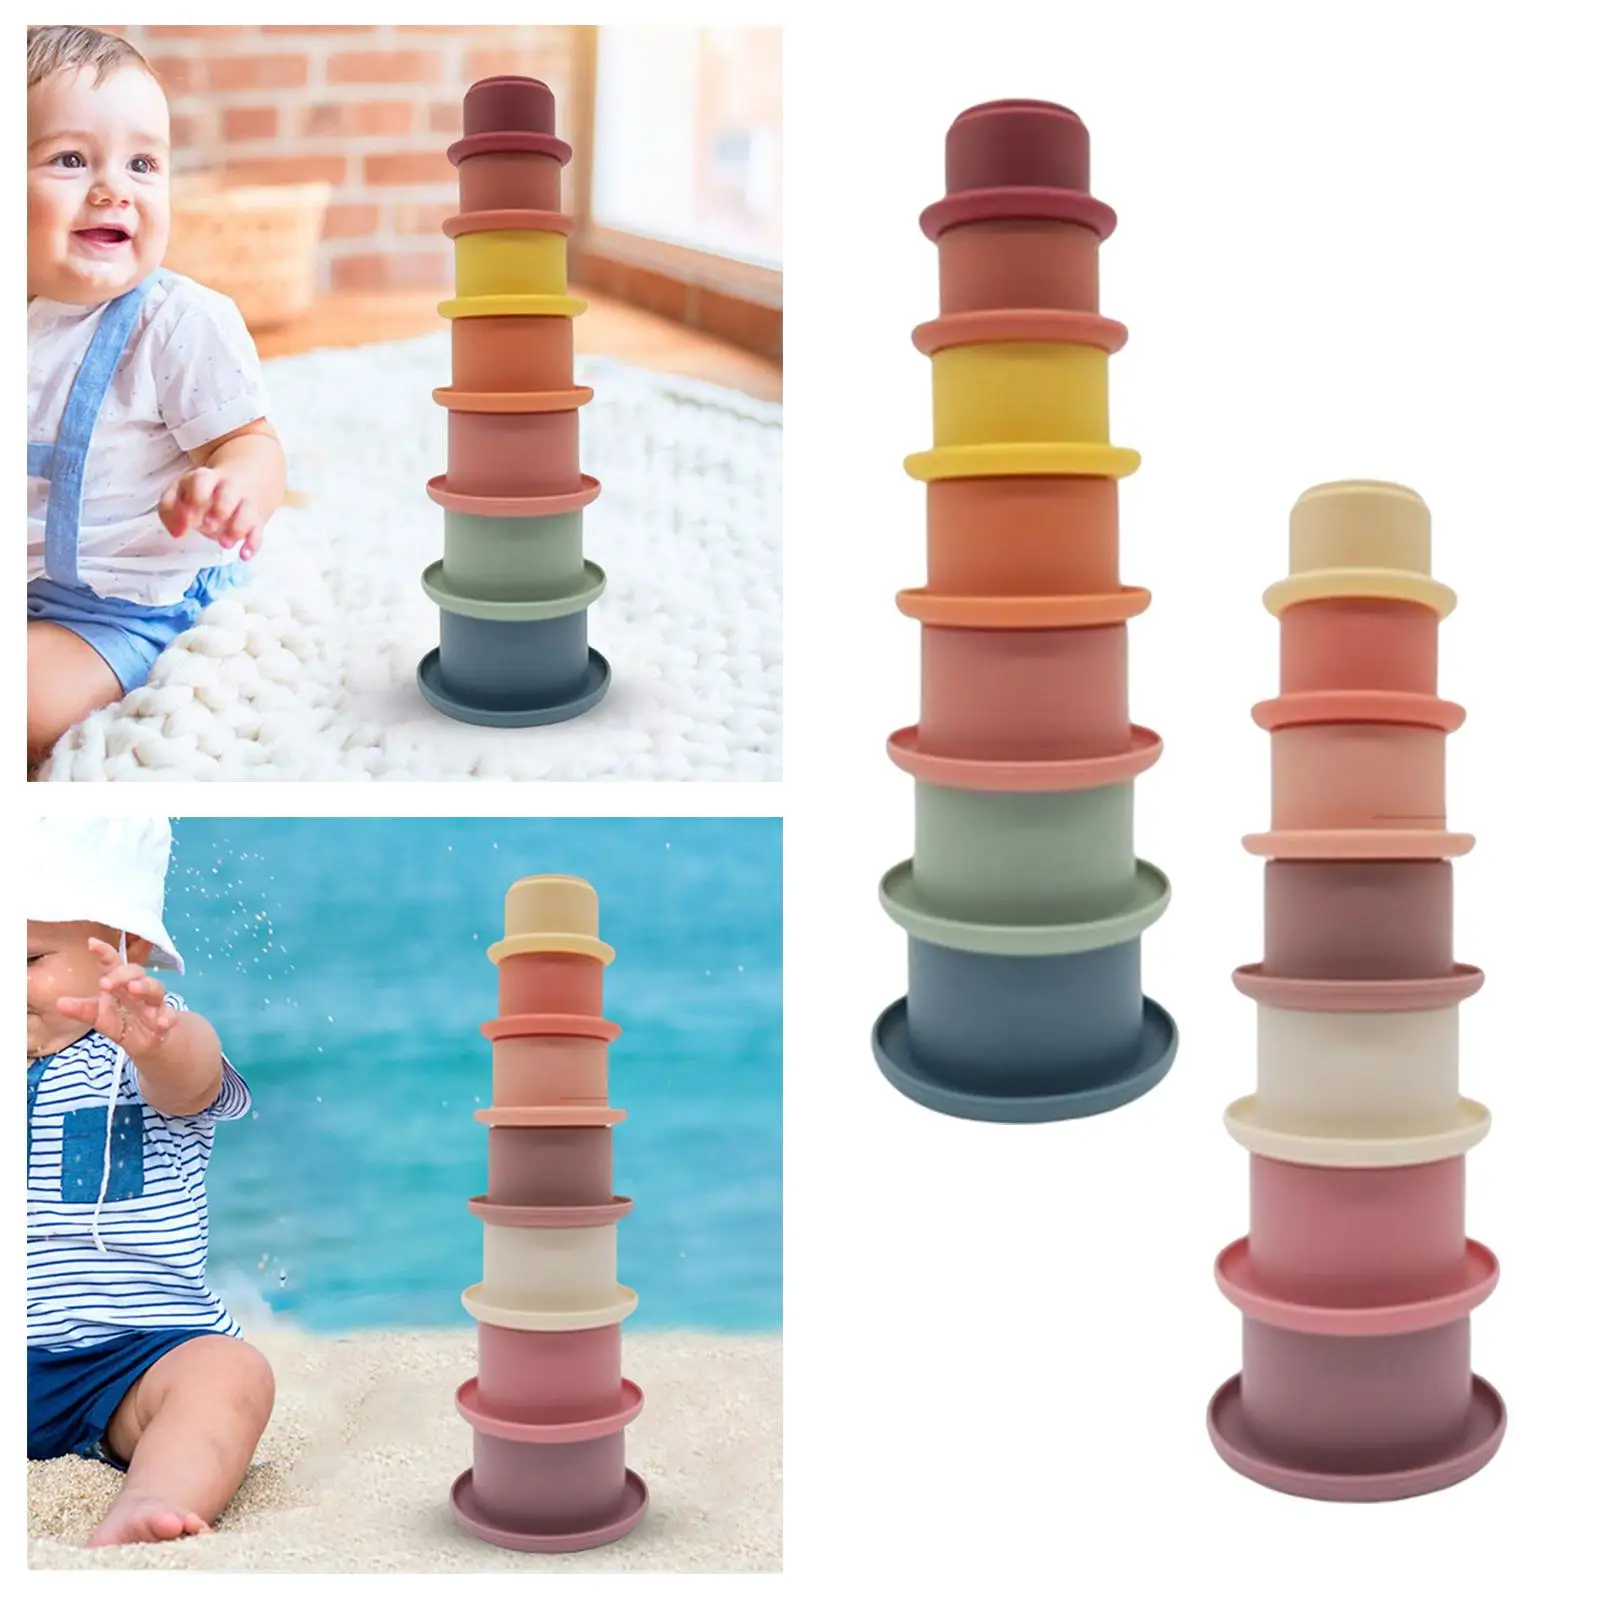 7Pcs Fun Stacking Cups Toy Bathtub Toys Learning Sorting and Building Blocks Nesting Cups Stack up Cup for Children Toddler Baby